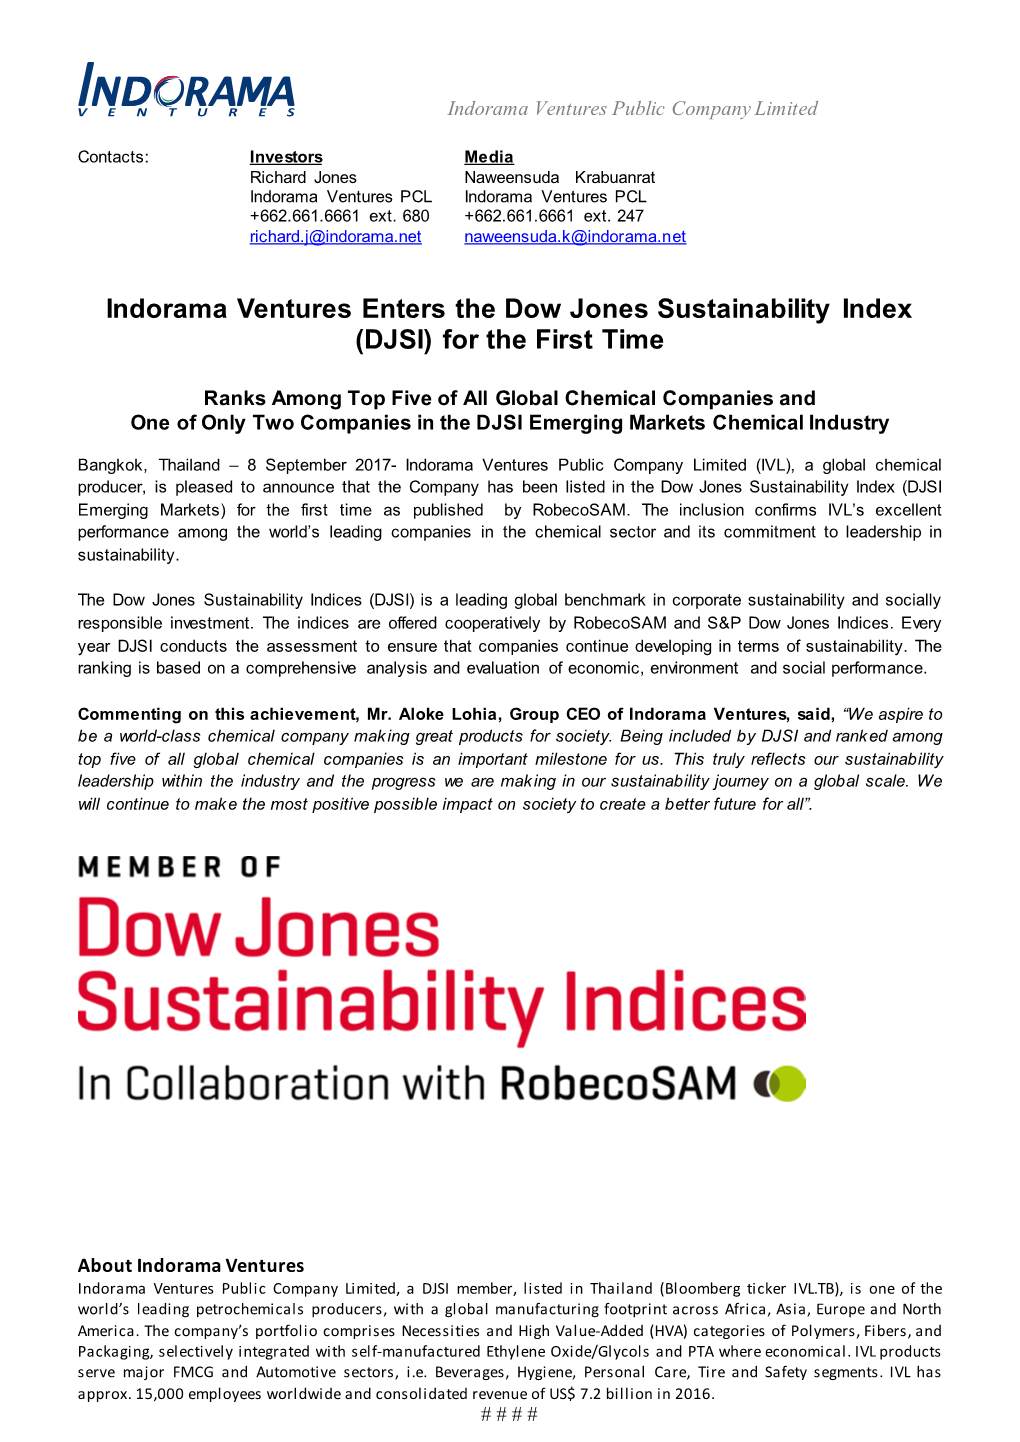 Indorama Ventures Enters the Dow Jones Sustainability Index (DJSI) for the First Time